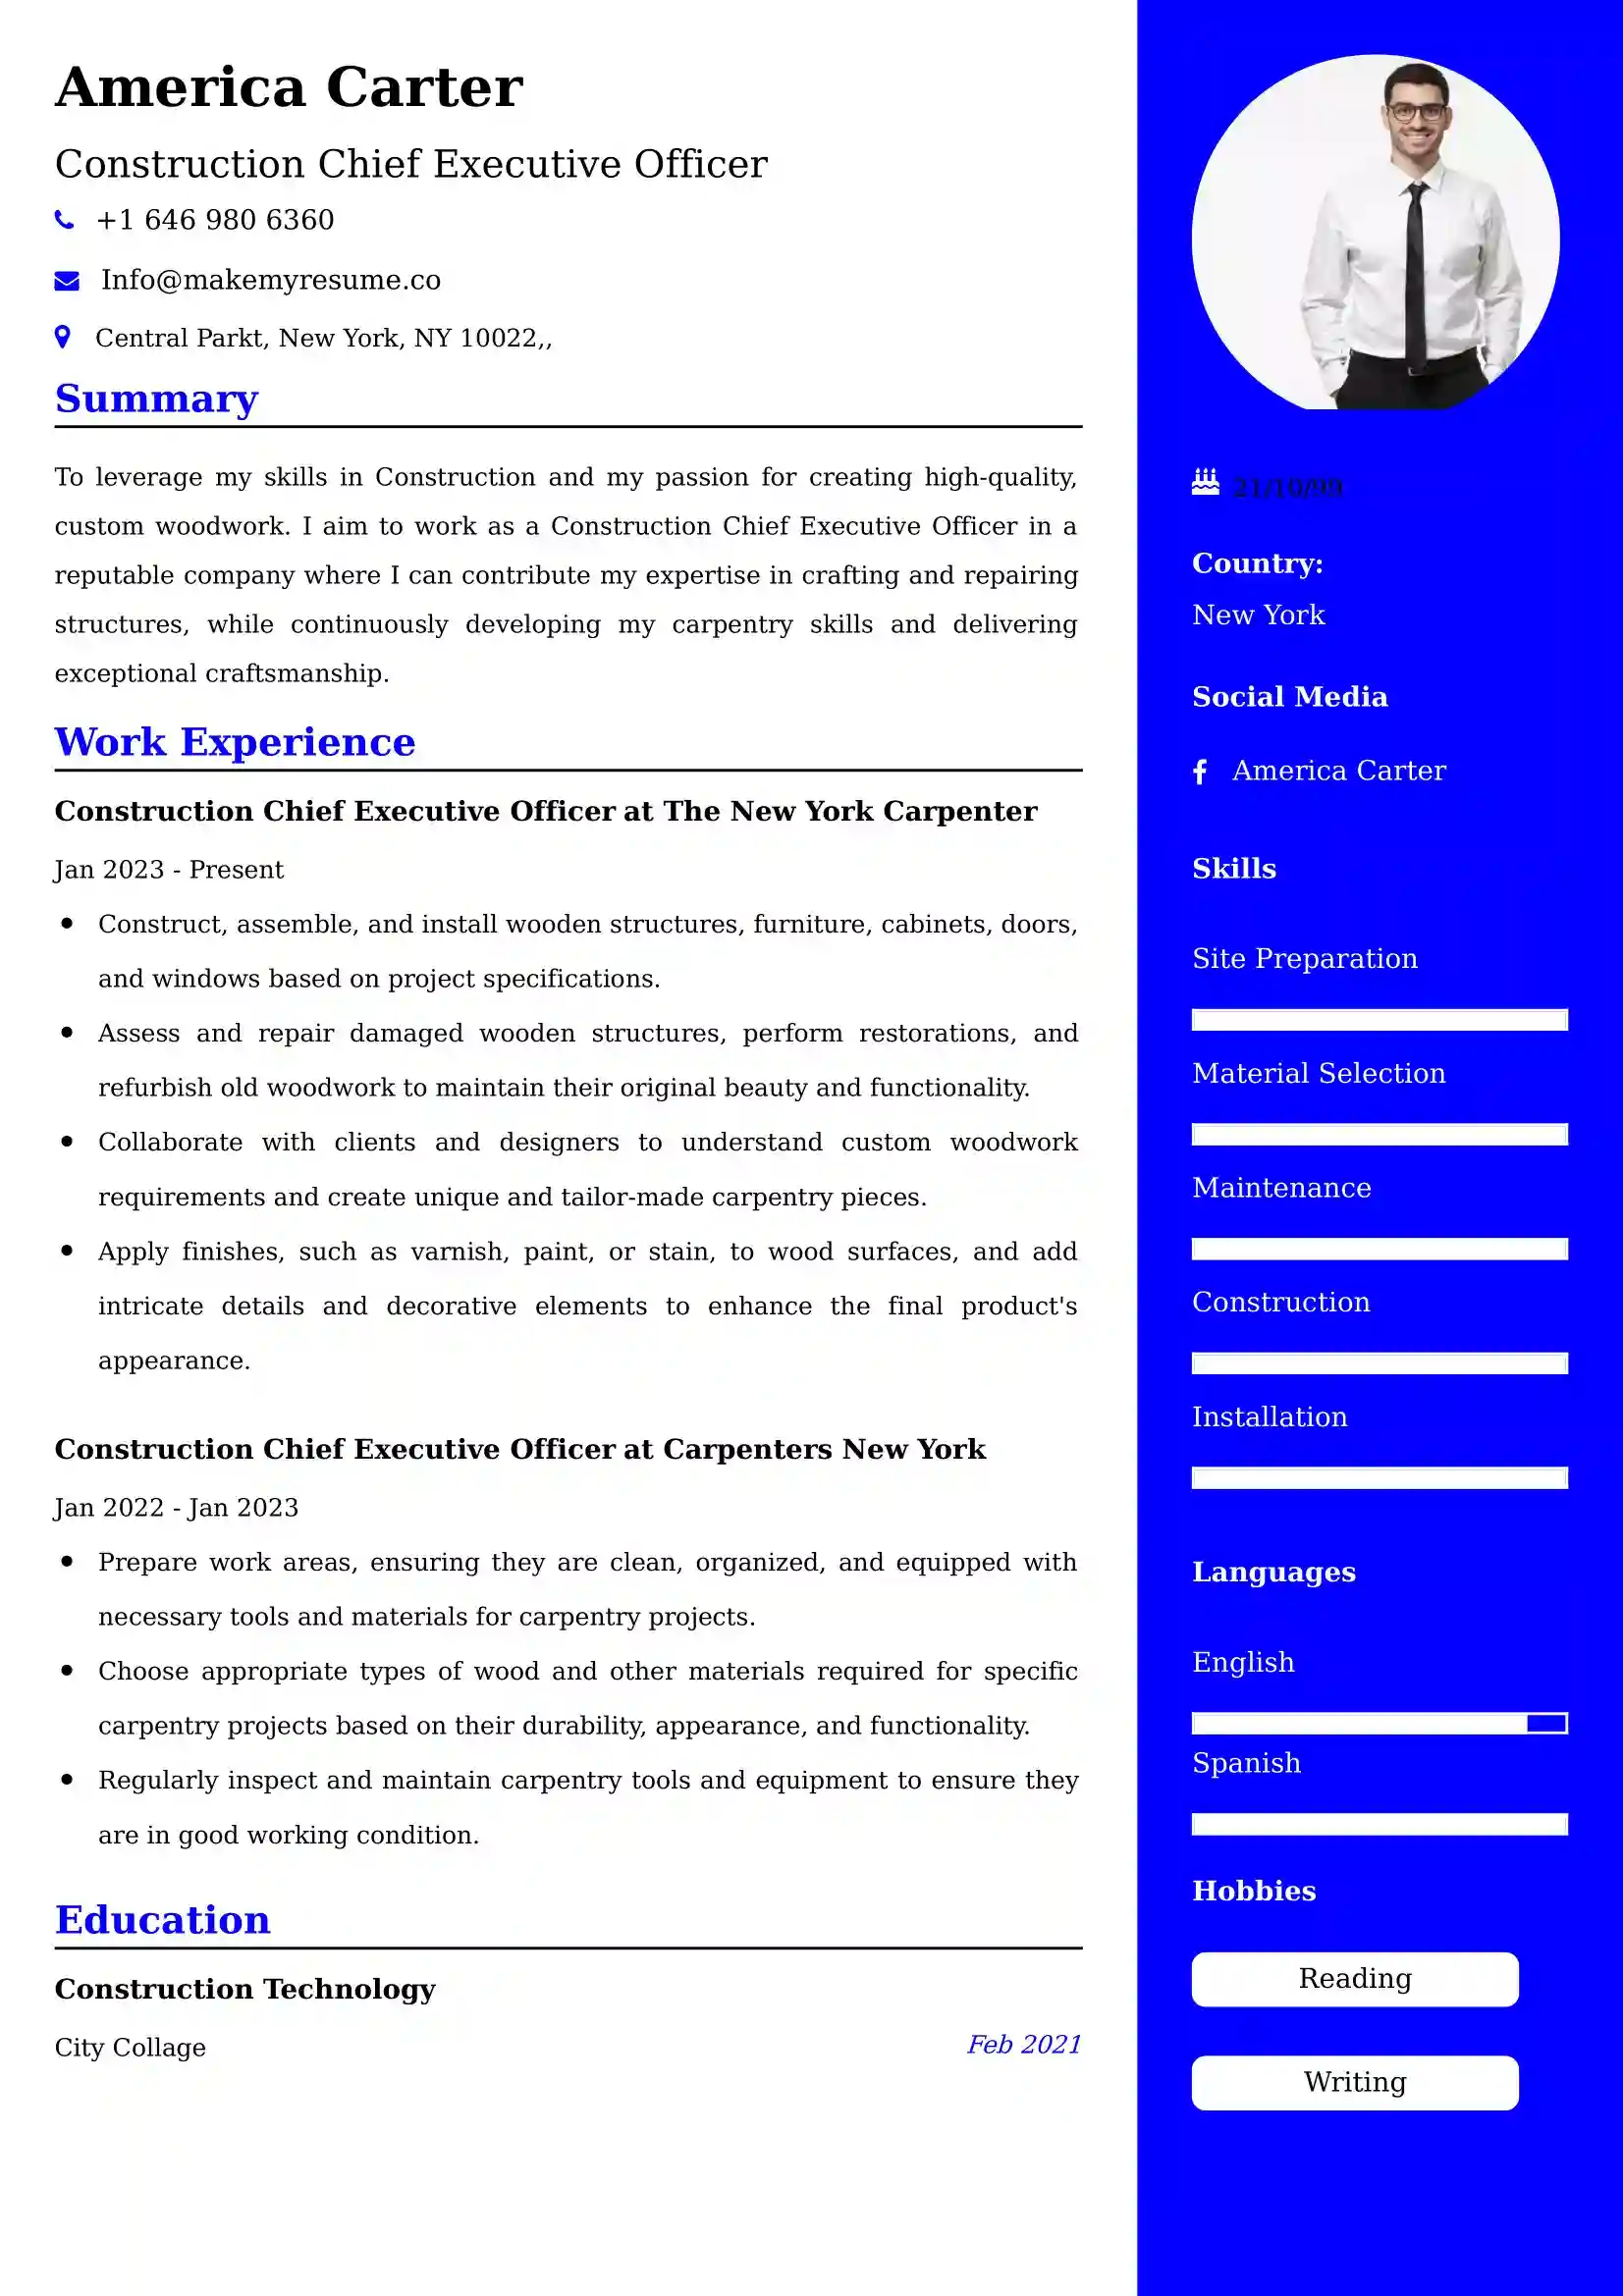 Construction Chief Executive Officer Resume Examples - UK Format, Latest Template.